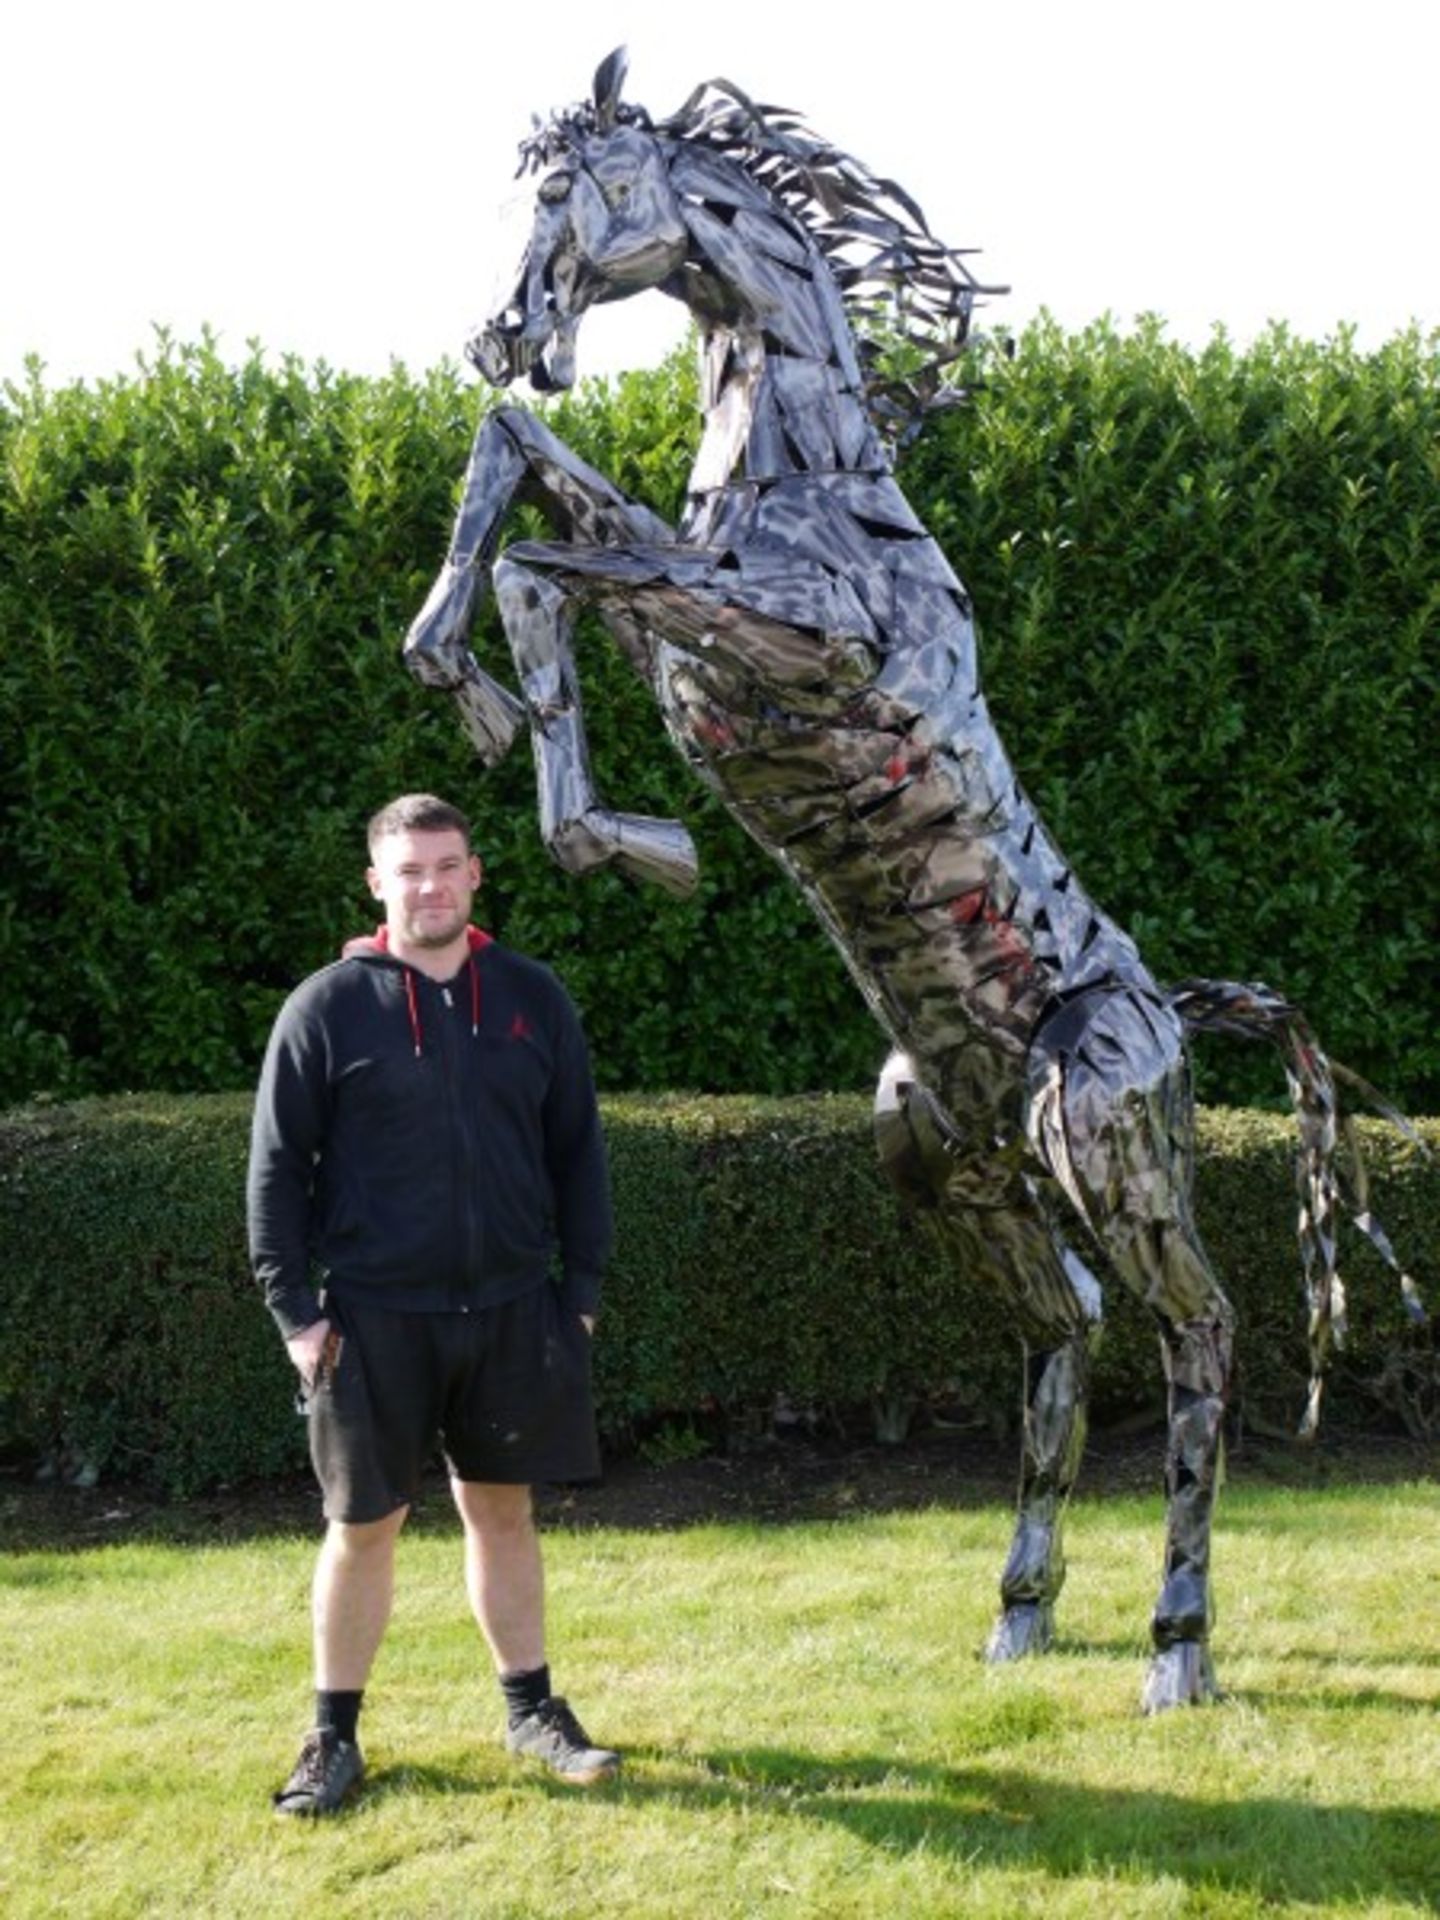 HUGE REARING HORSE STATUE 11FT HIGH - Image 3 of 5